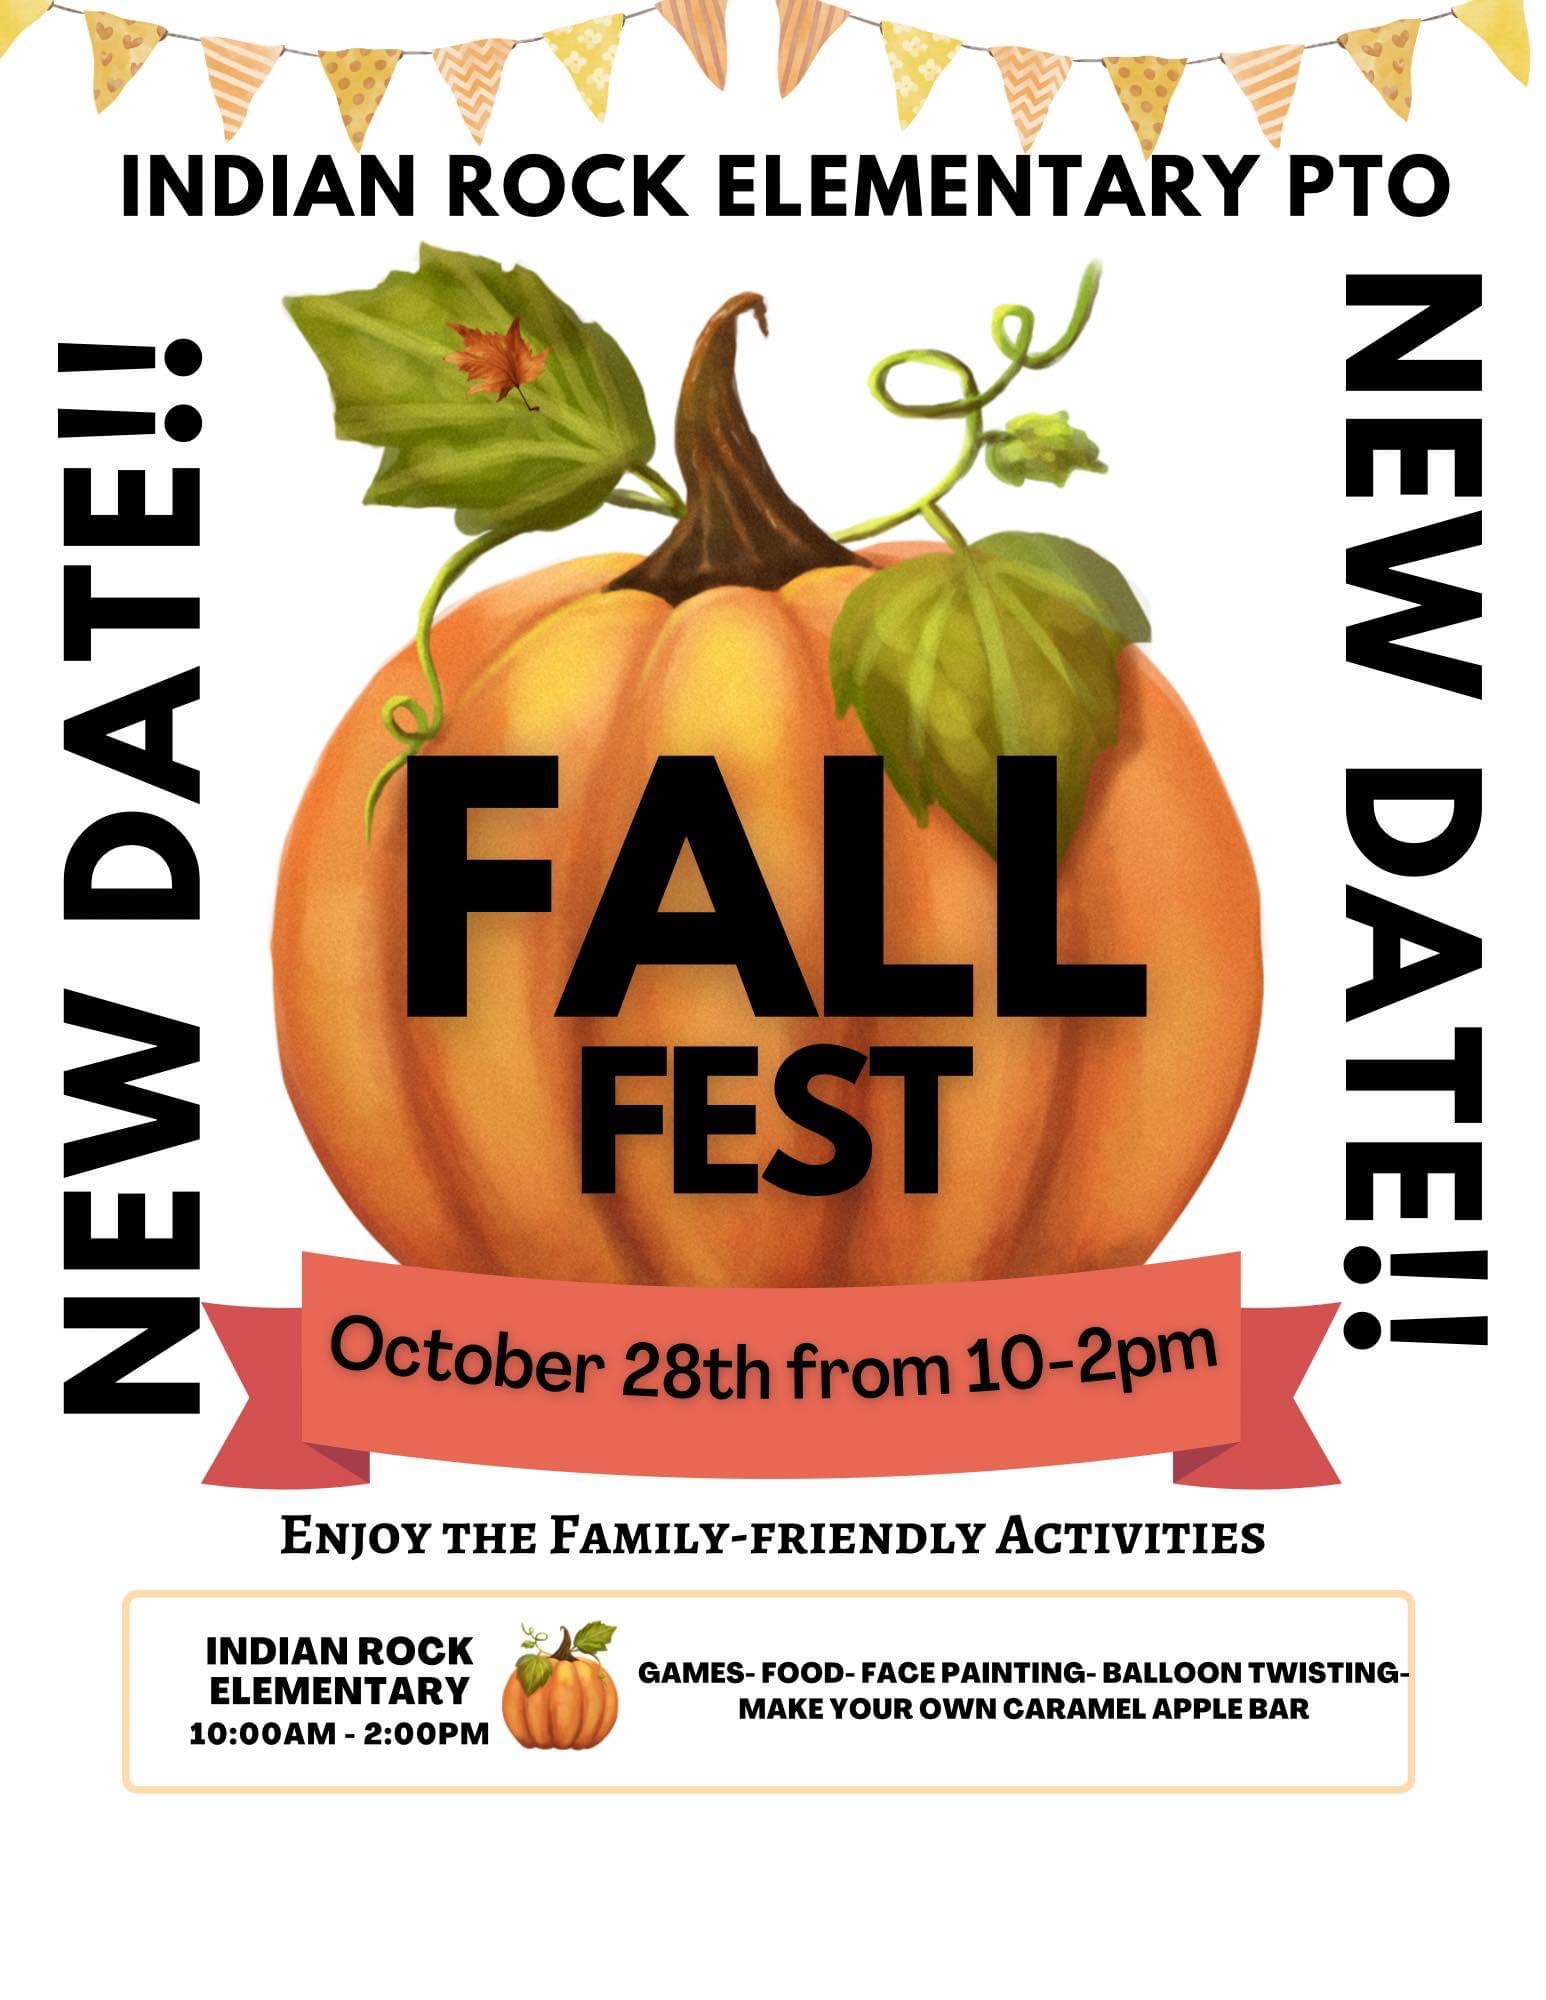 Indian Rock's Fall Fest is Oct 28